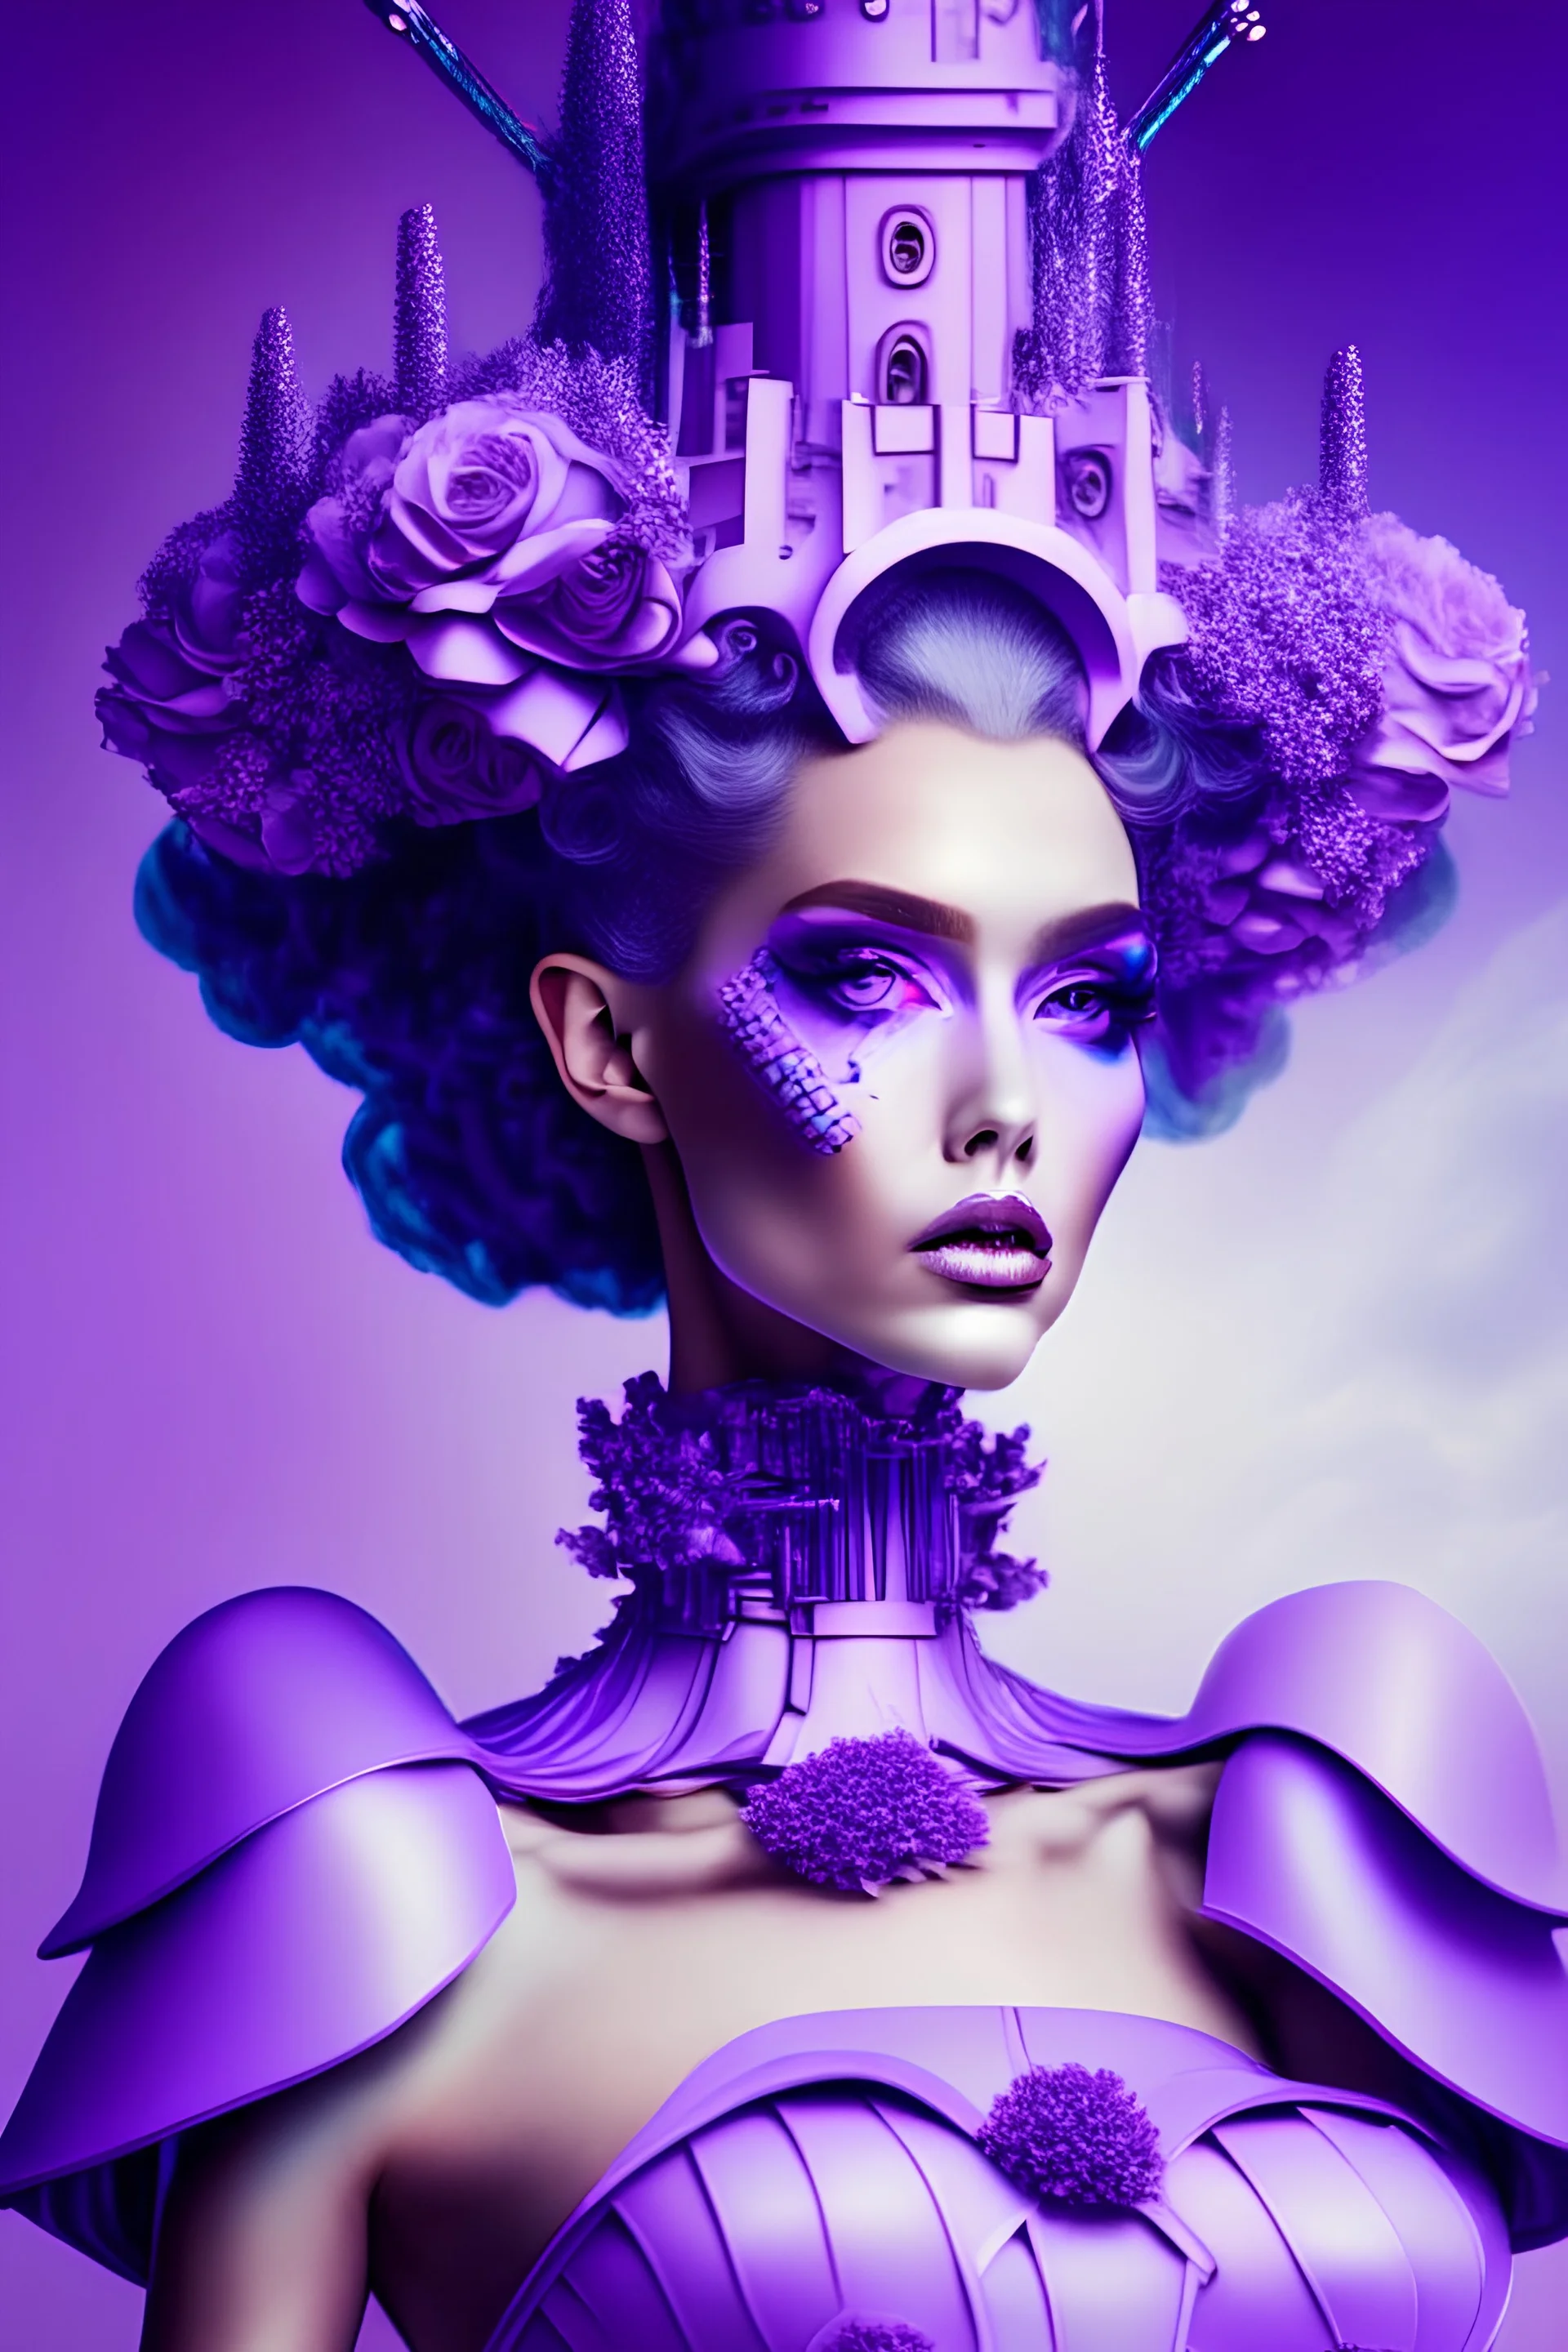 sexy robotic avatar women wearing lavender dress castle crown pink fantasy highheels haute couture floral american shot beautiful face blue purple beautiful lips